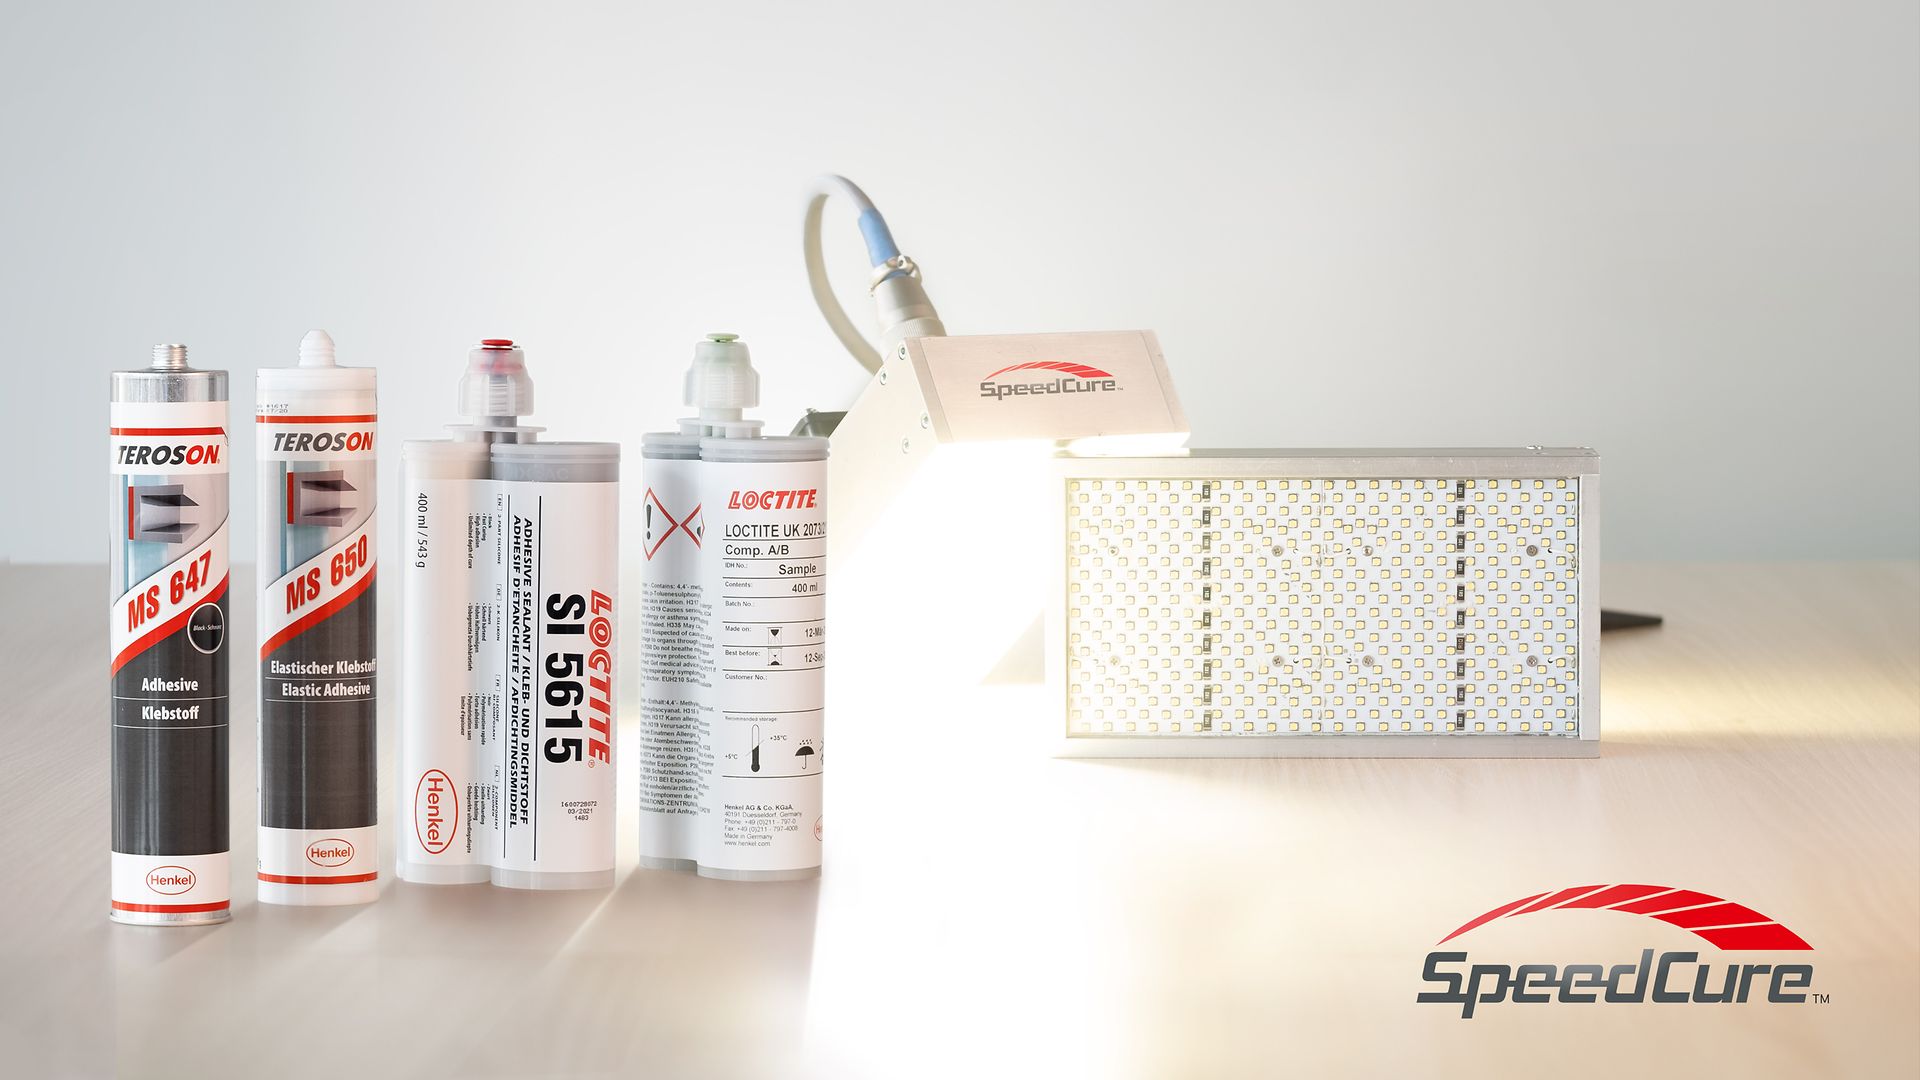 
SpeedCure light and adhesive solutions bring more accurate bonding even on narrow bonding areas or free-form shapes and deliver higher efficiency in the manufacturer’s assembly process.